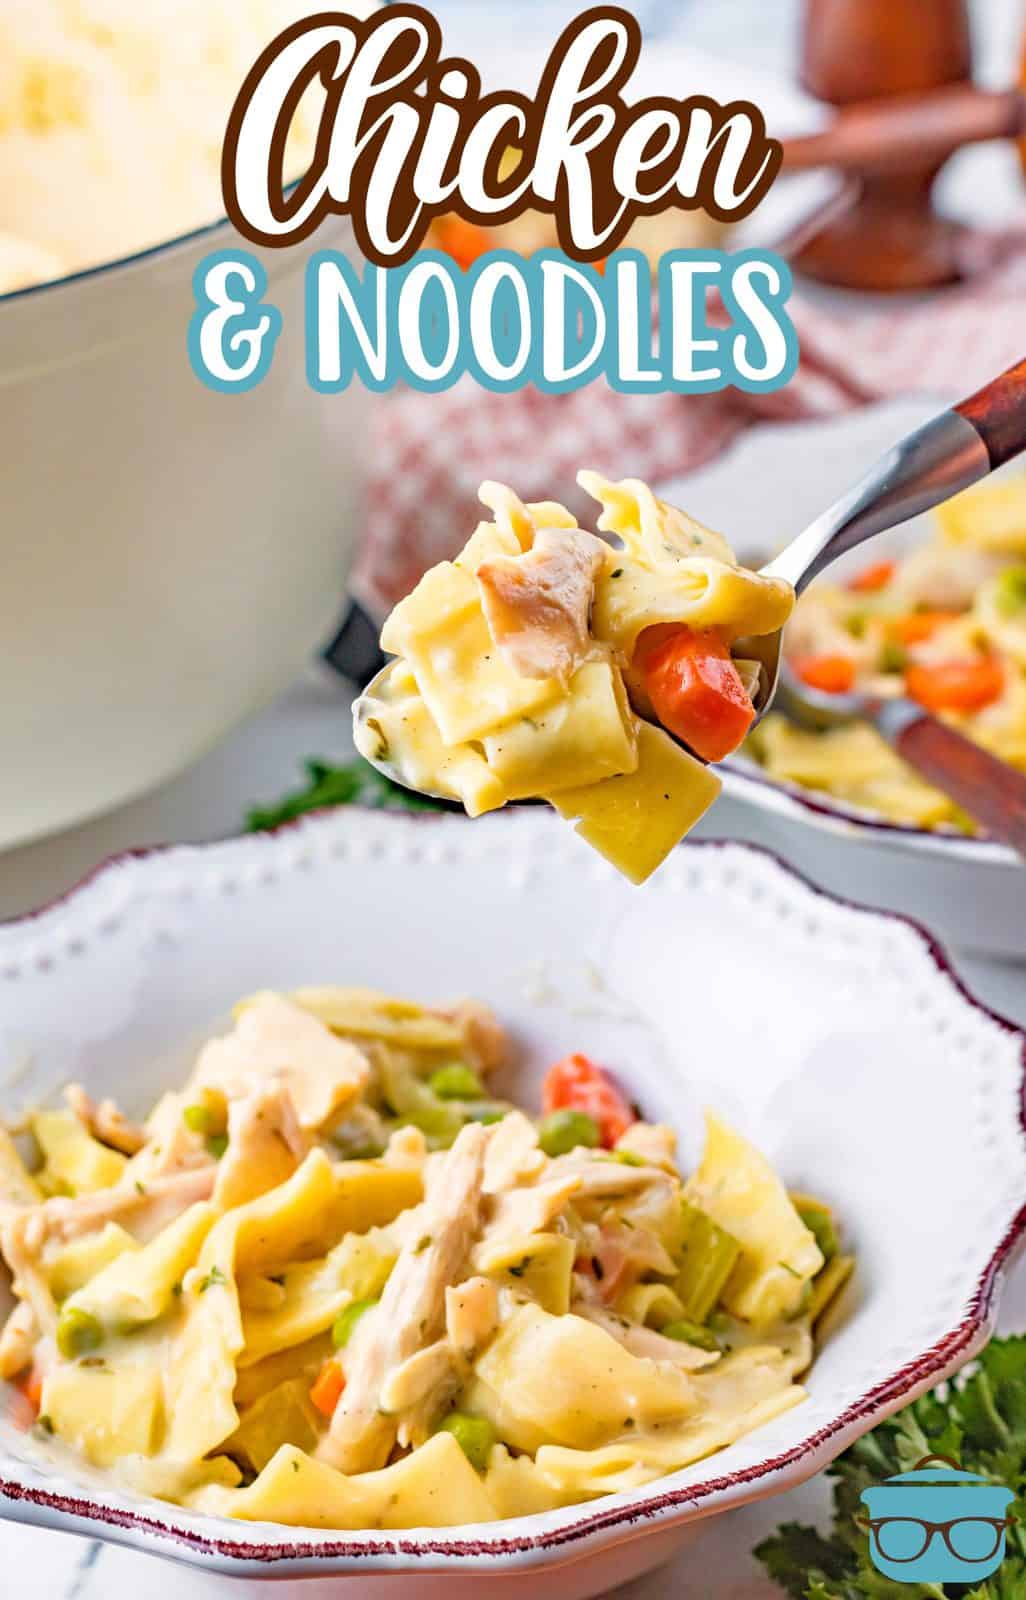 Pinterest image of spoon holding up some of the chicken and noodles out of the bowl.